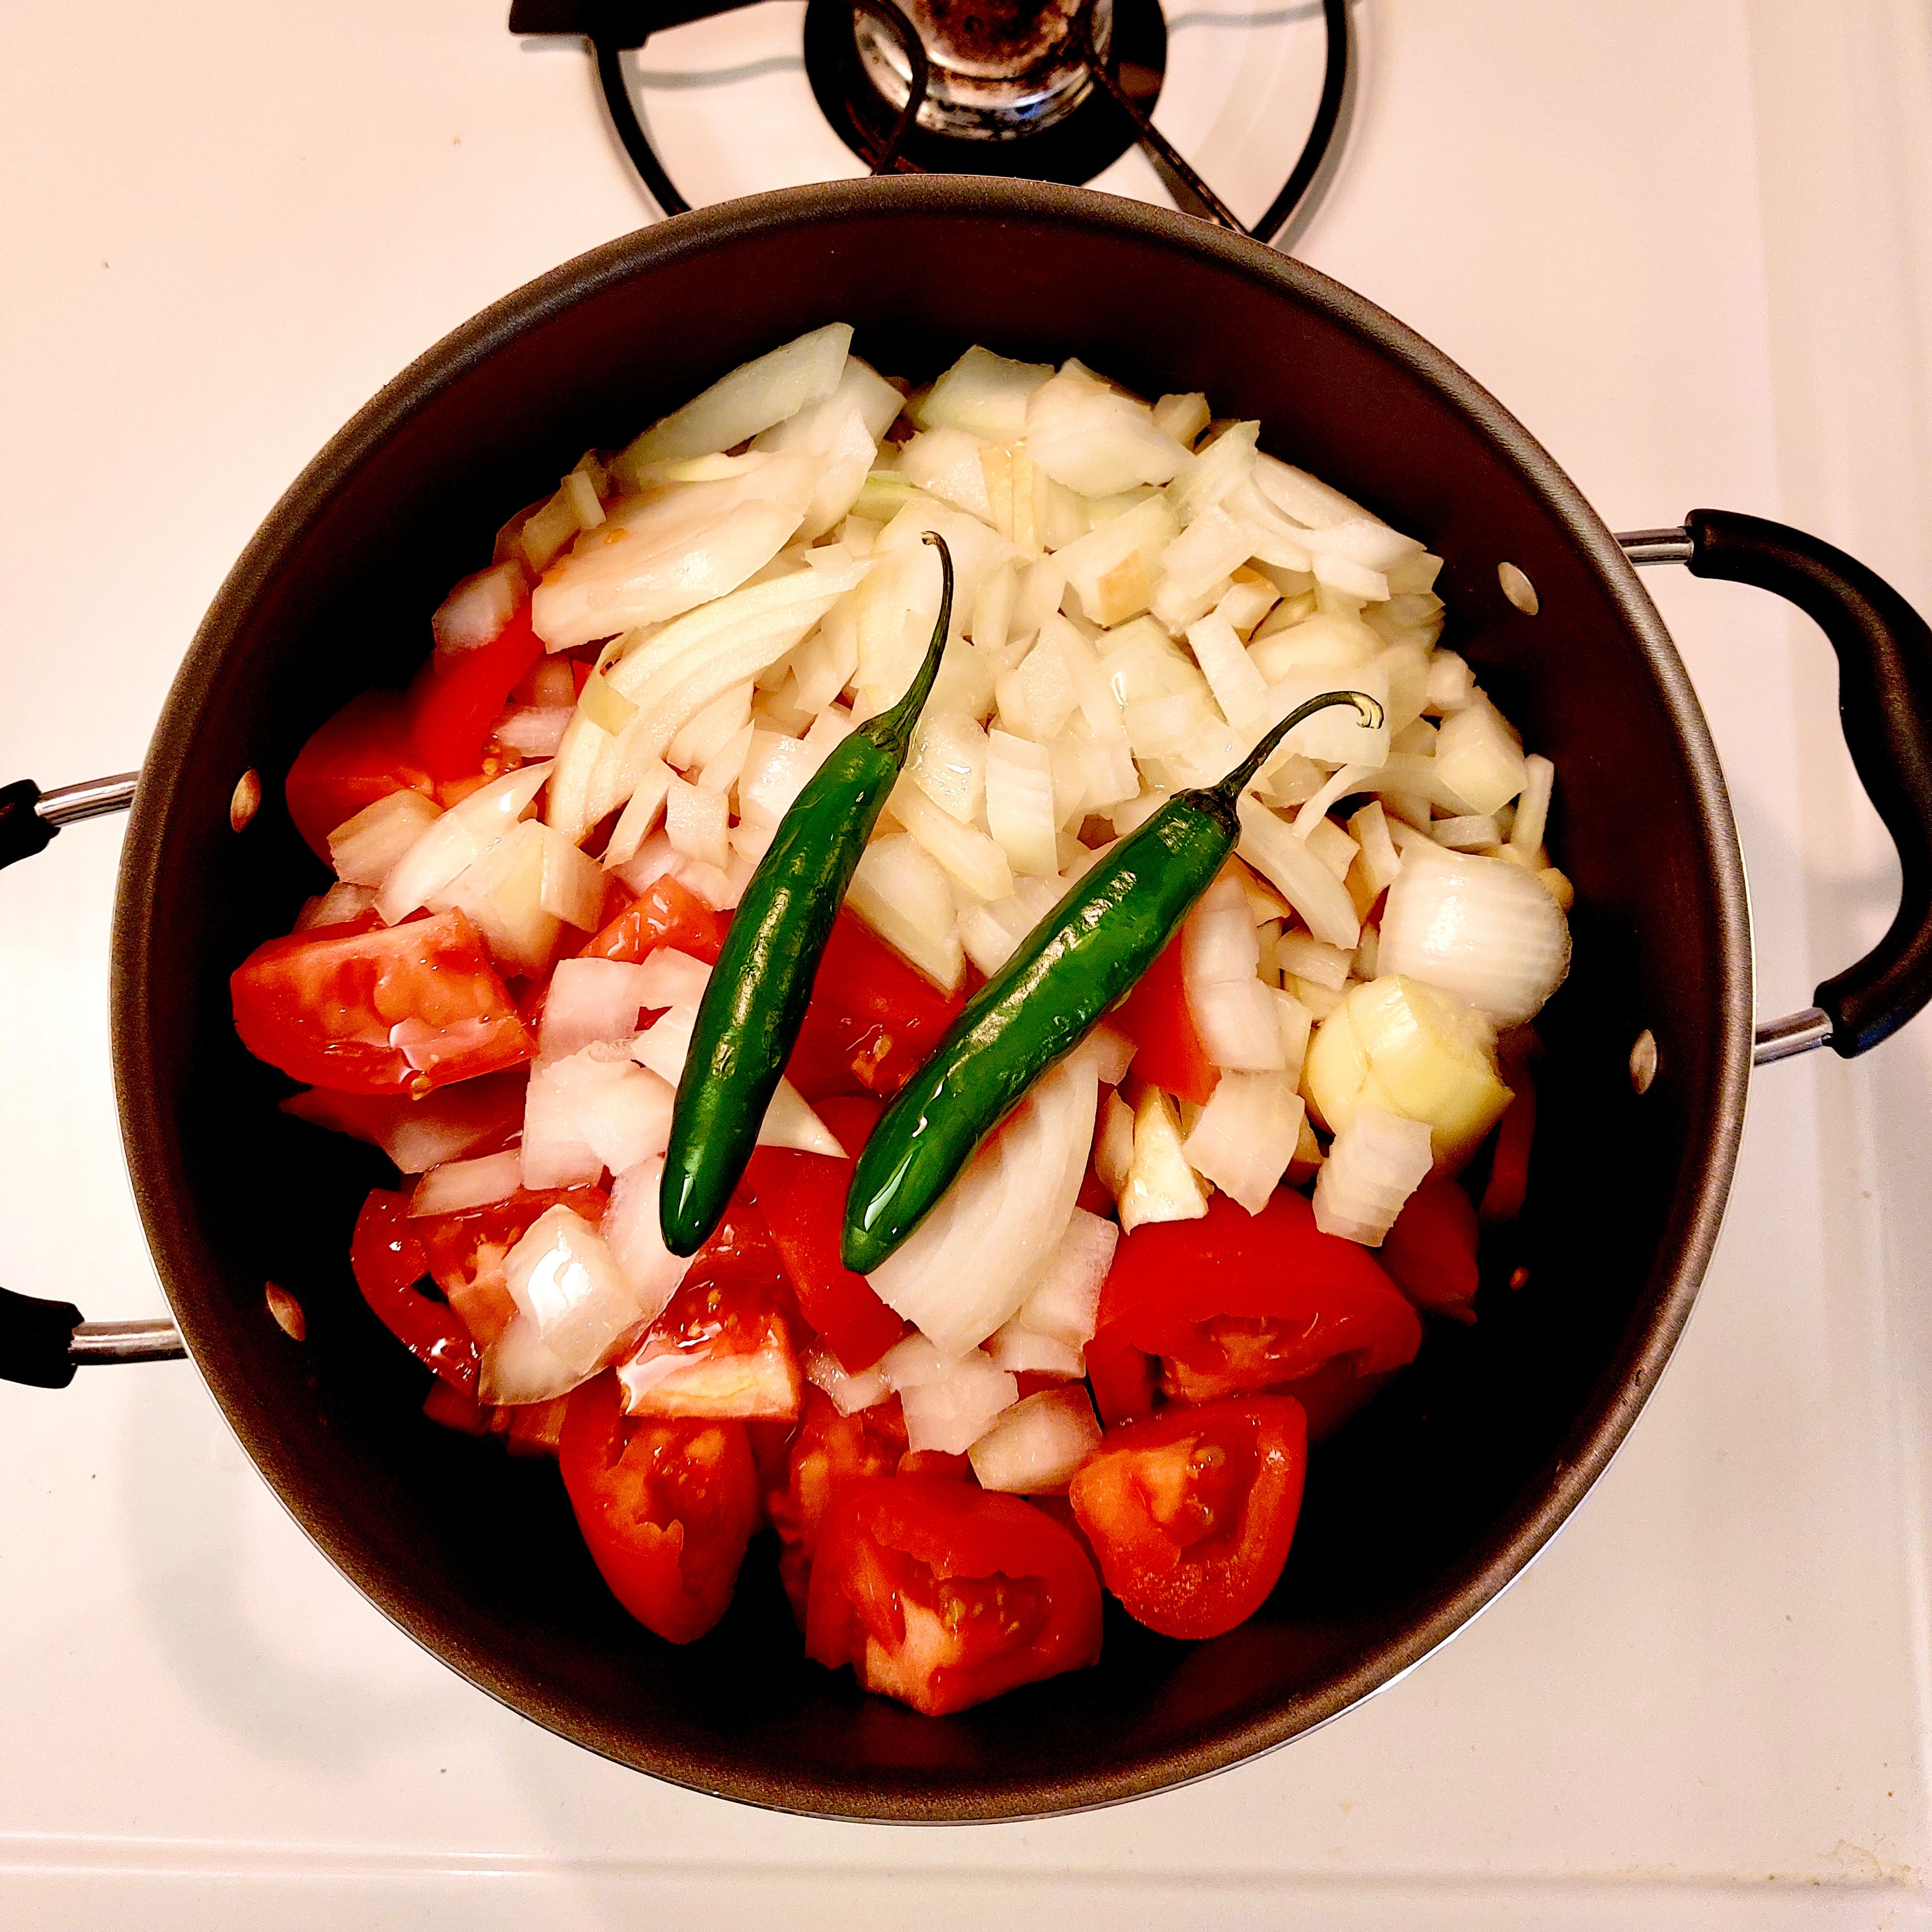 Preheat a large pan and add tomatoes, onions, garlic and serrano. Drizzle lightly with olive oil and close with a lid. Let everything cook over medium heat for 25 minutes.